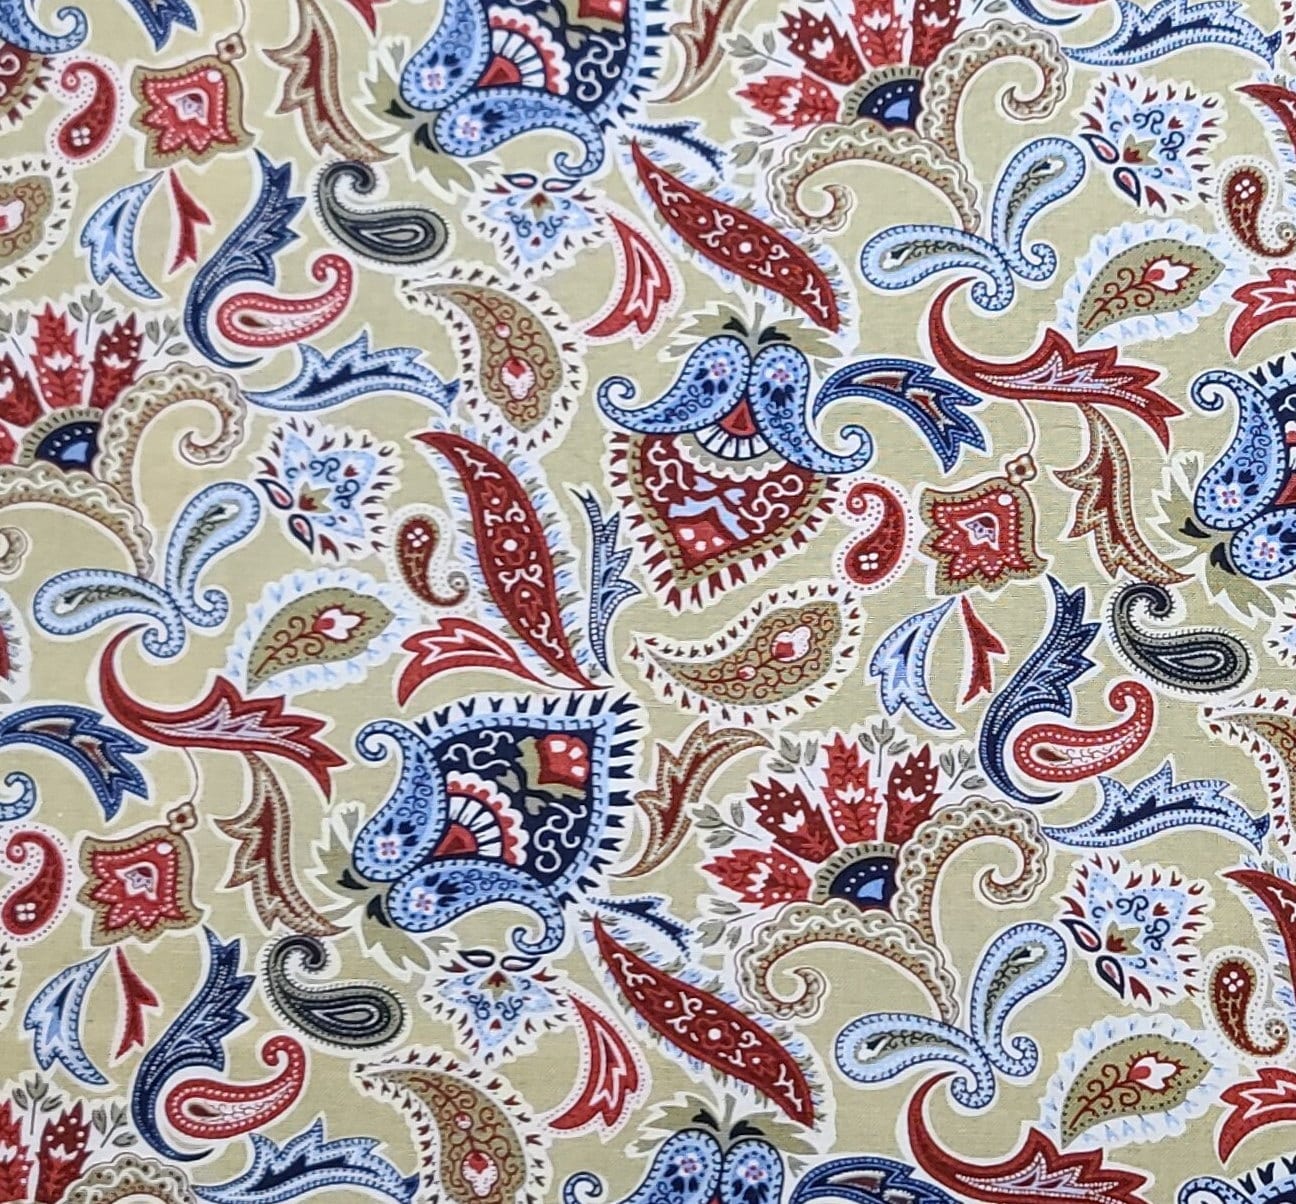 JoAnn Fabric - Khaki Fabric / White, Red and Blue Paisley, Feather and Heart Print